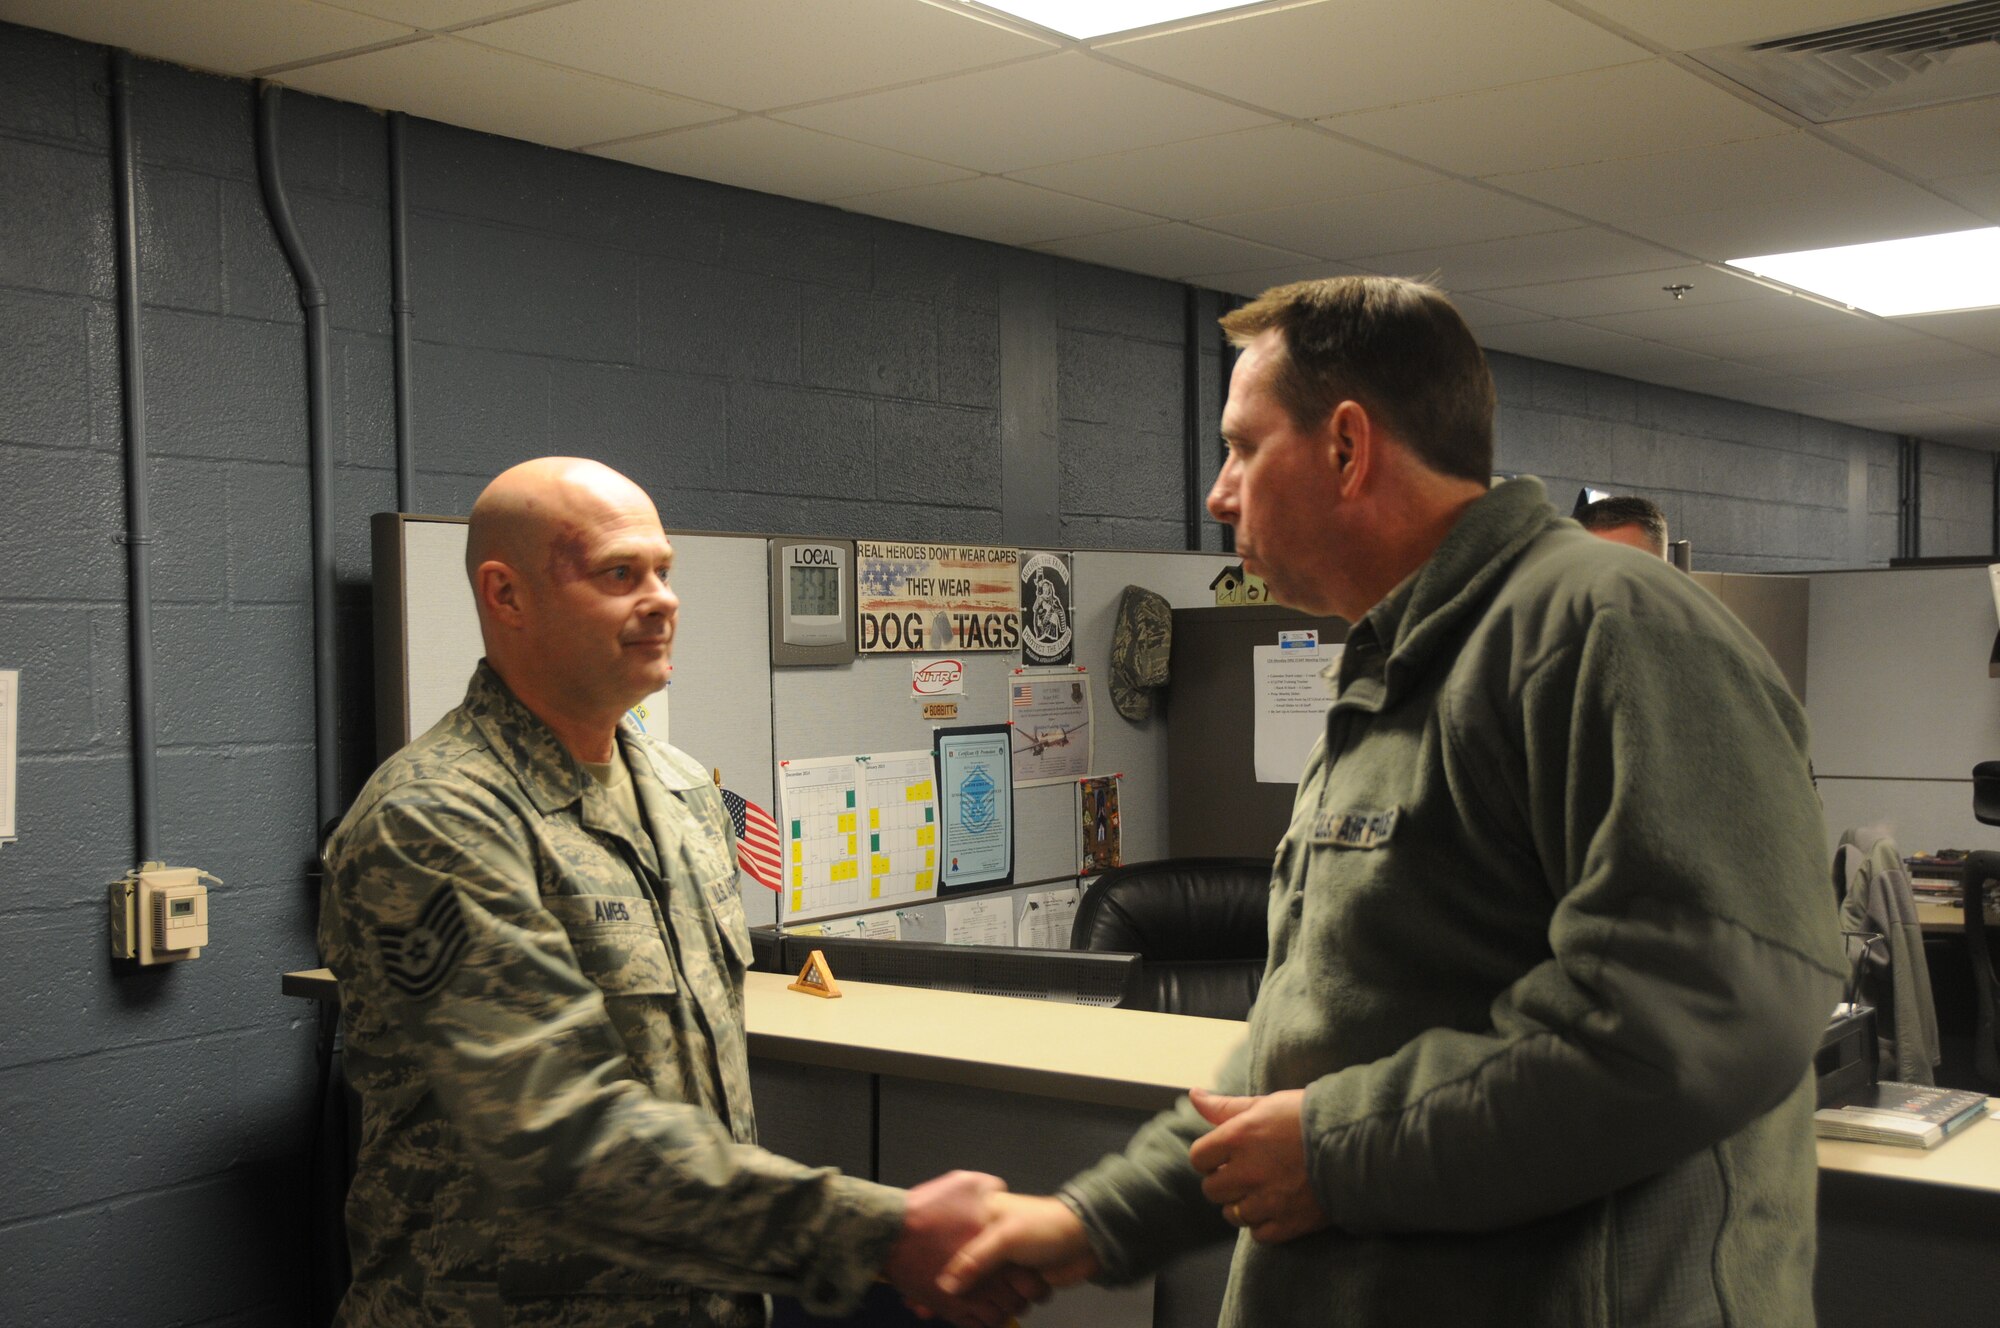 Tech. Sgt. Jeffery Ames, a member of the 153rd Intelligence Squadron, is coined by Maj. Gen. John Shanahan, commander of the 25th Air Force, at Ebbing Air National Guard Base, Fort Smith, Ark., Dec. 11, 2014. Shanahan’s visit encompassed seeing and understanding how the wing’s new mission aligns with the 25th AF. (U.S. Air National Guard photo by Airman 1st Class Cody Martin/released)